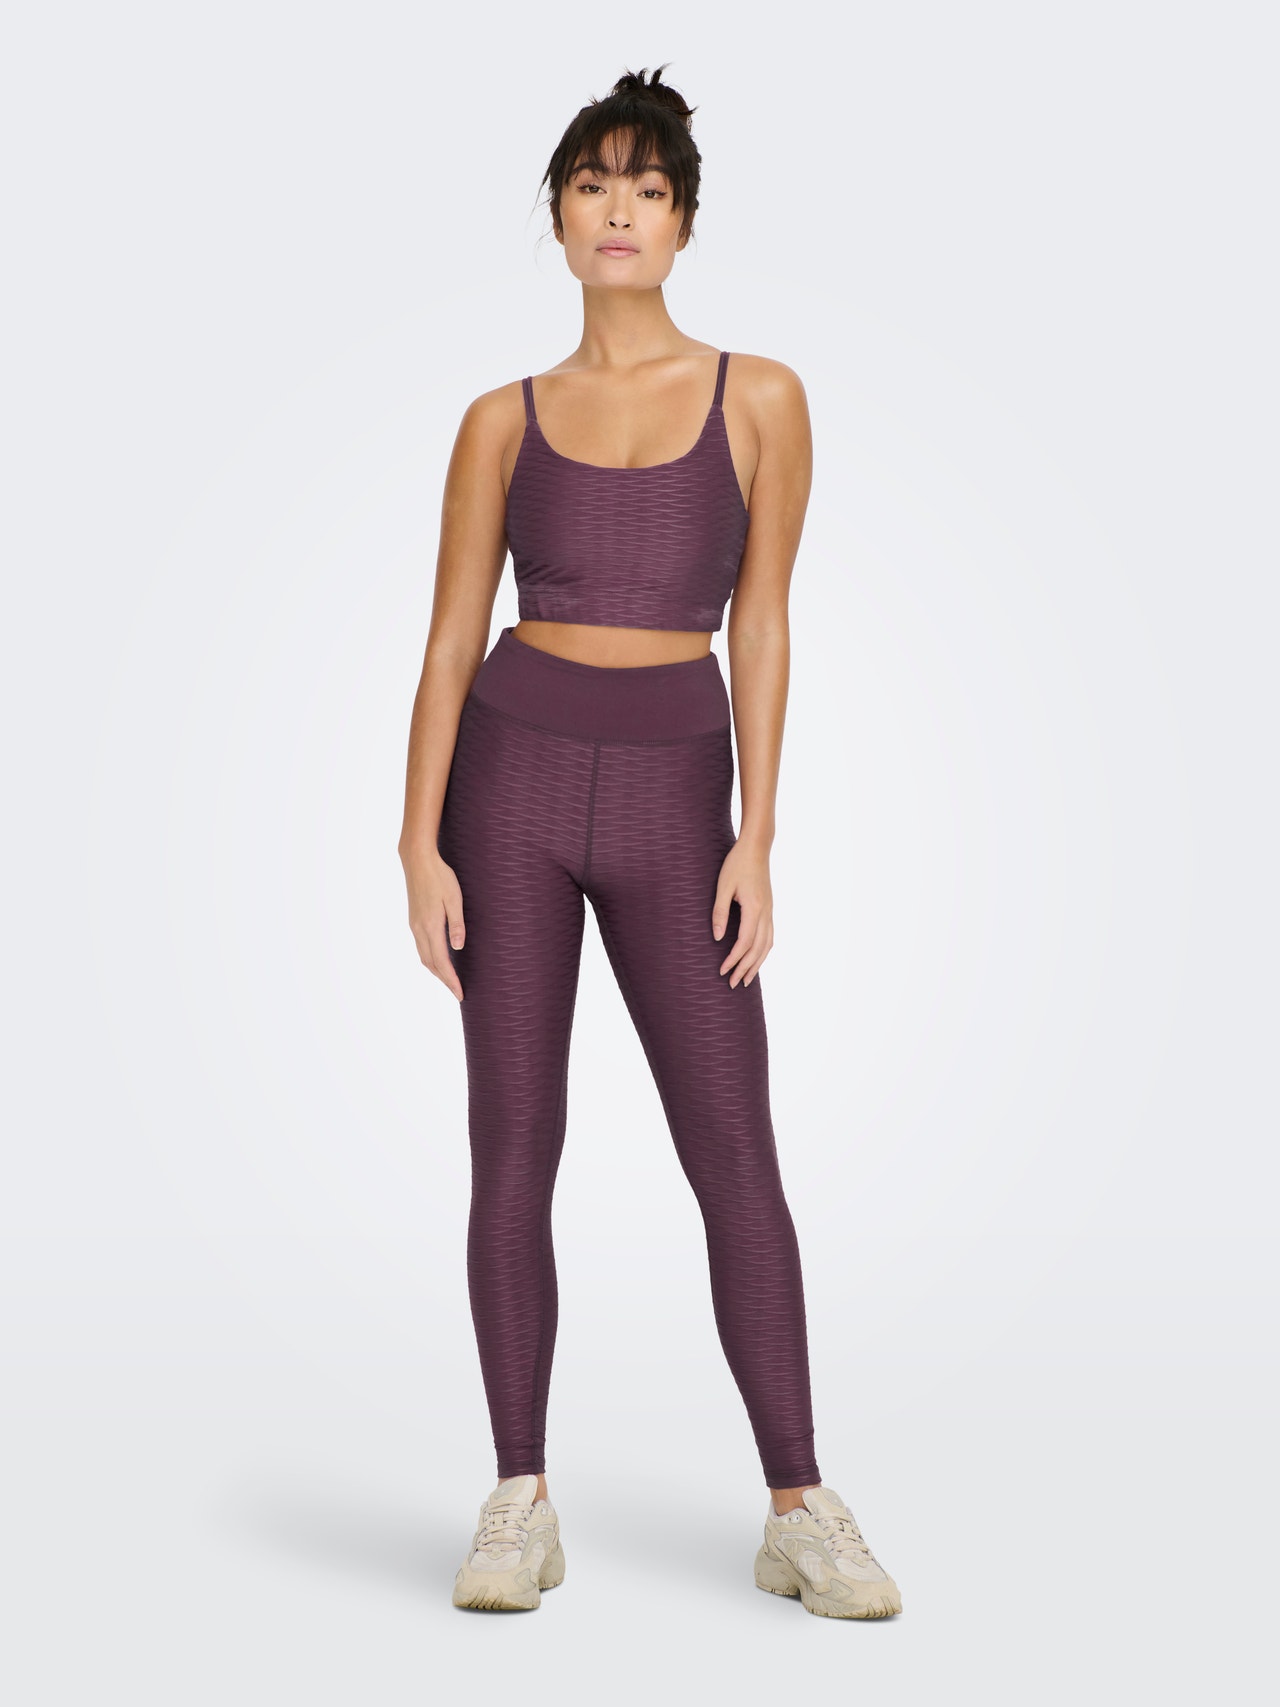 ONLY Slim Fit Hohe Taille Leggings -Eggplant - 15280447